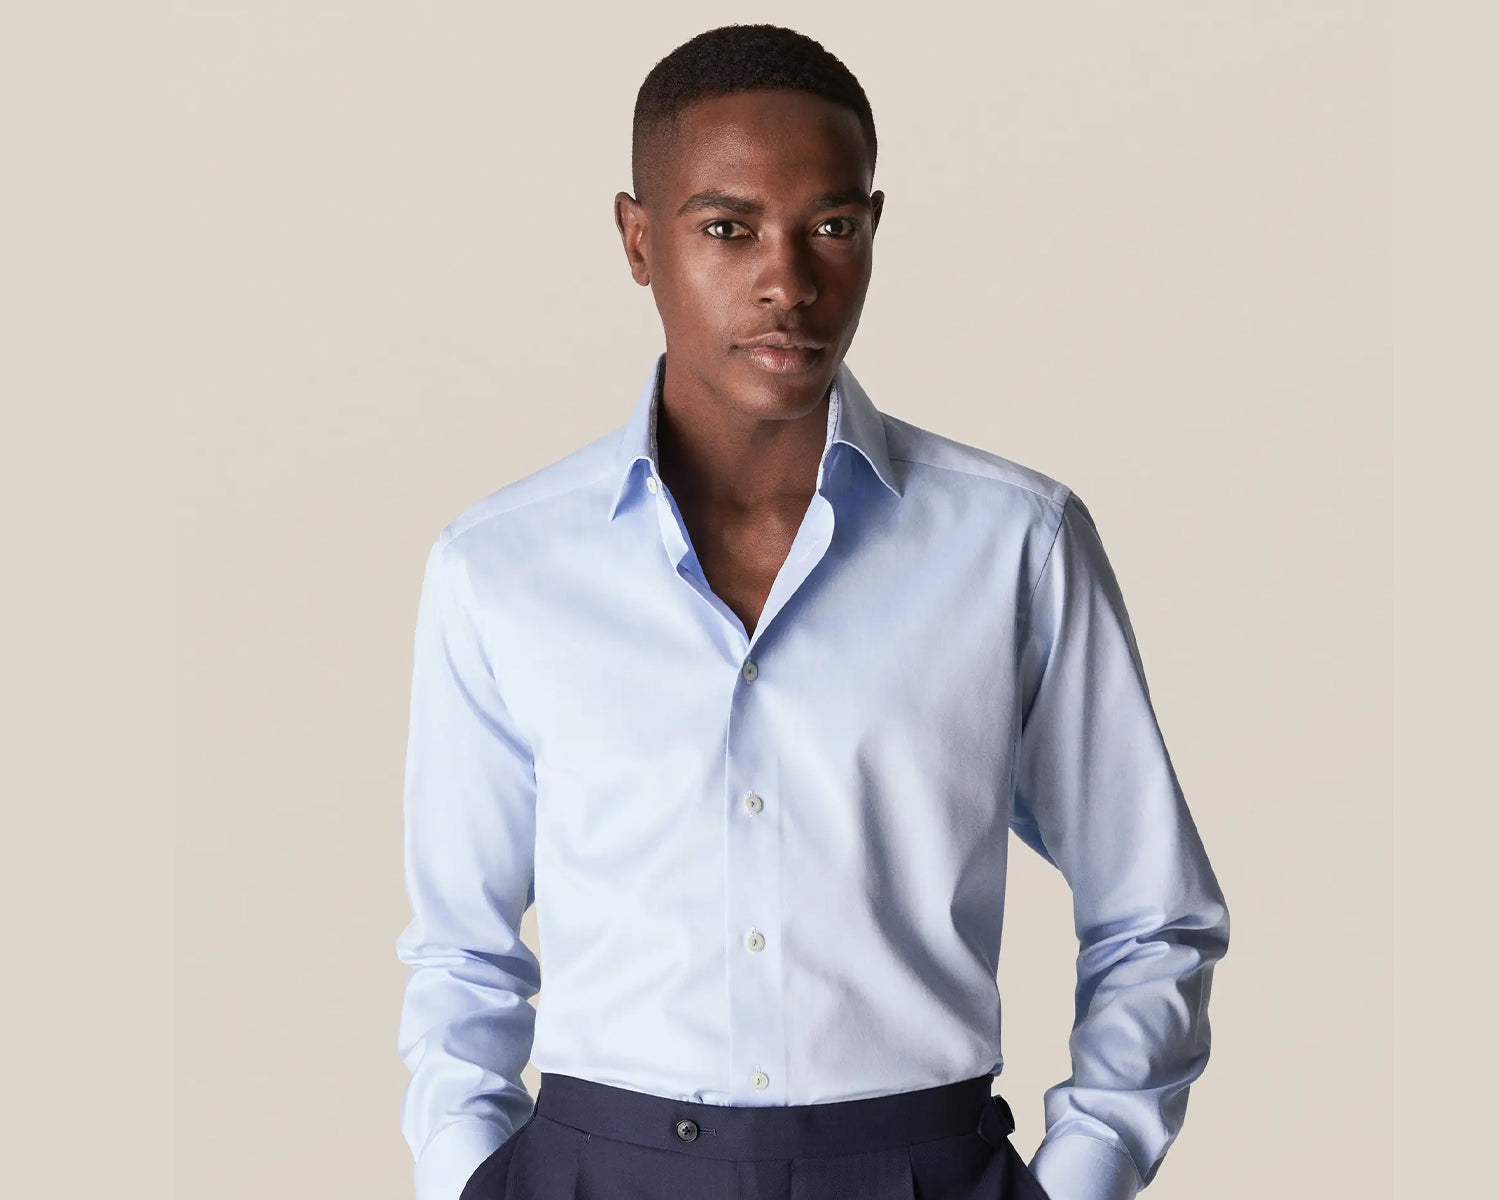 The Dress Shirt Guide for the Modern Professional